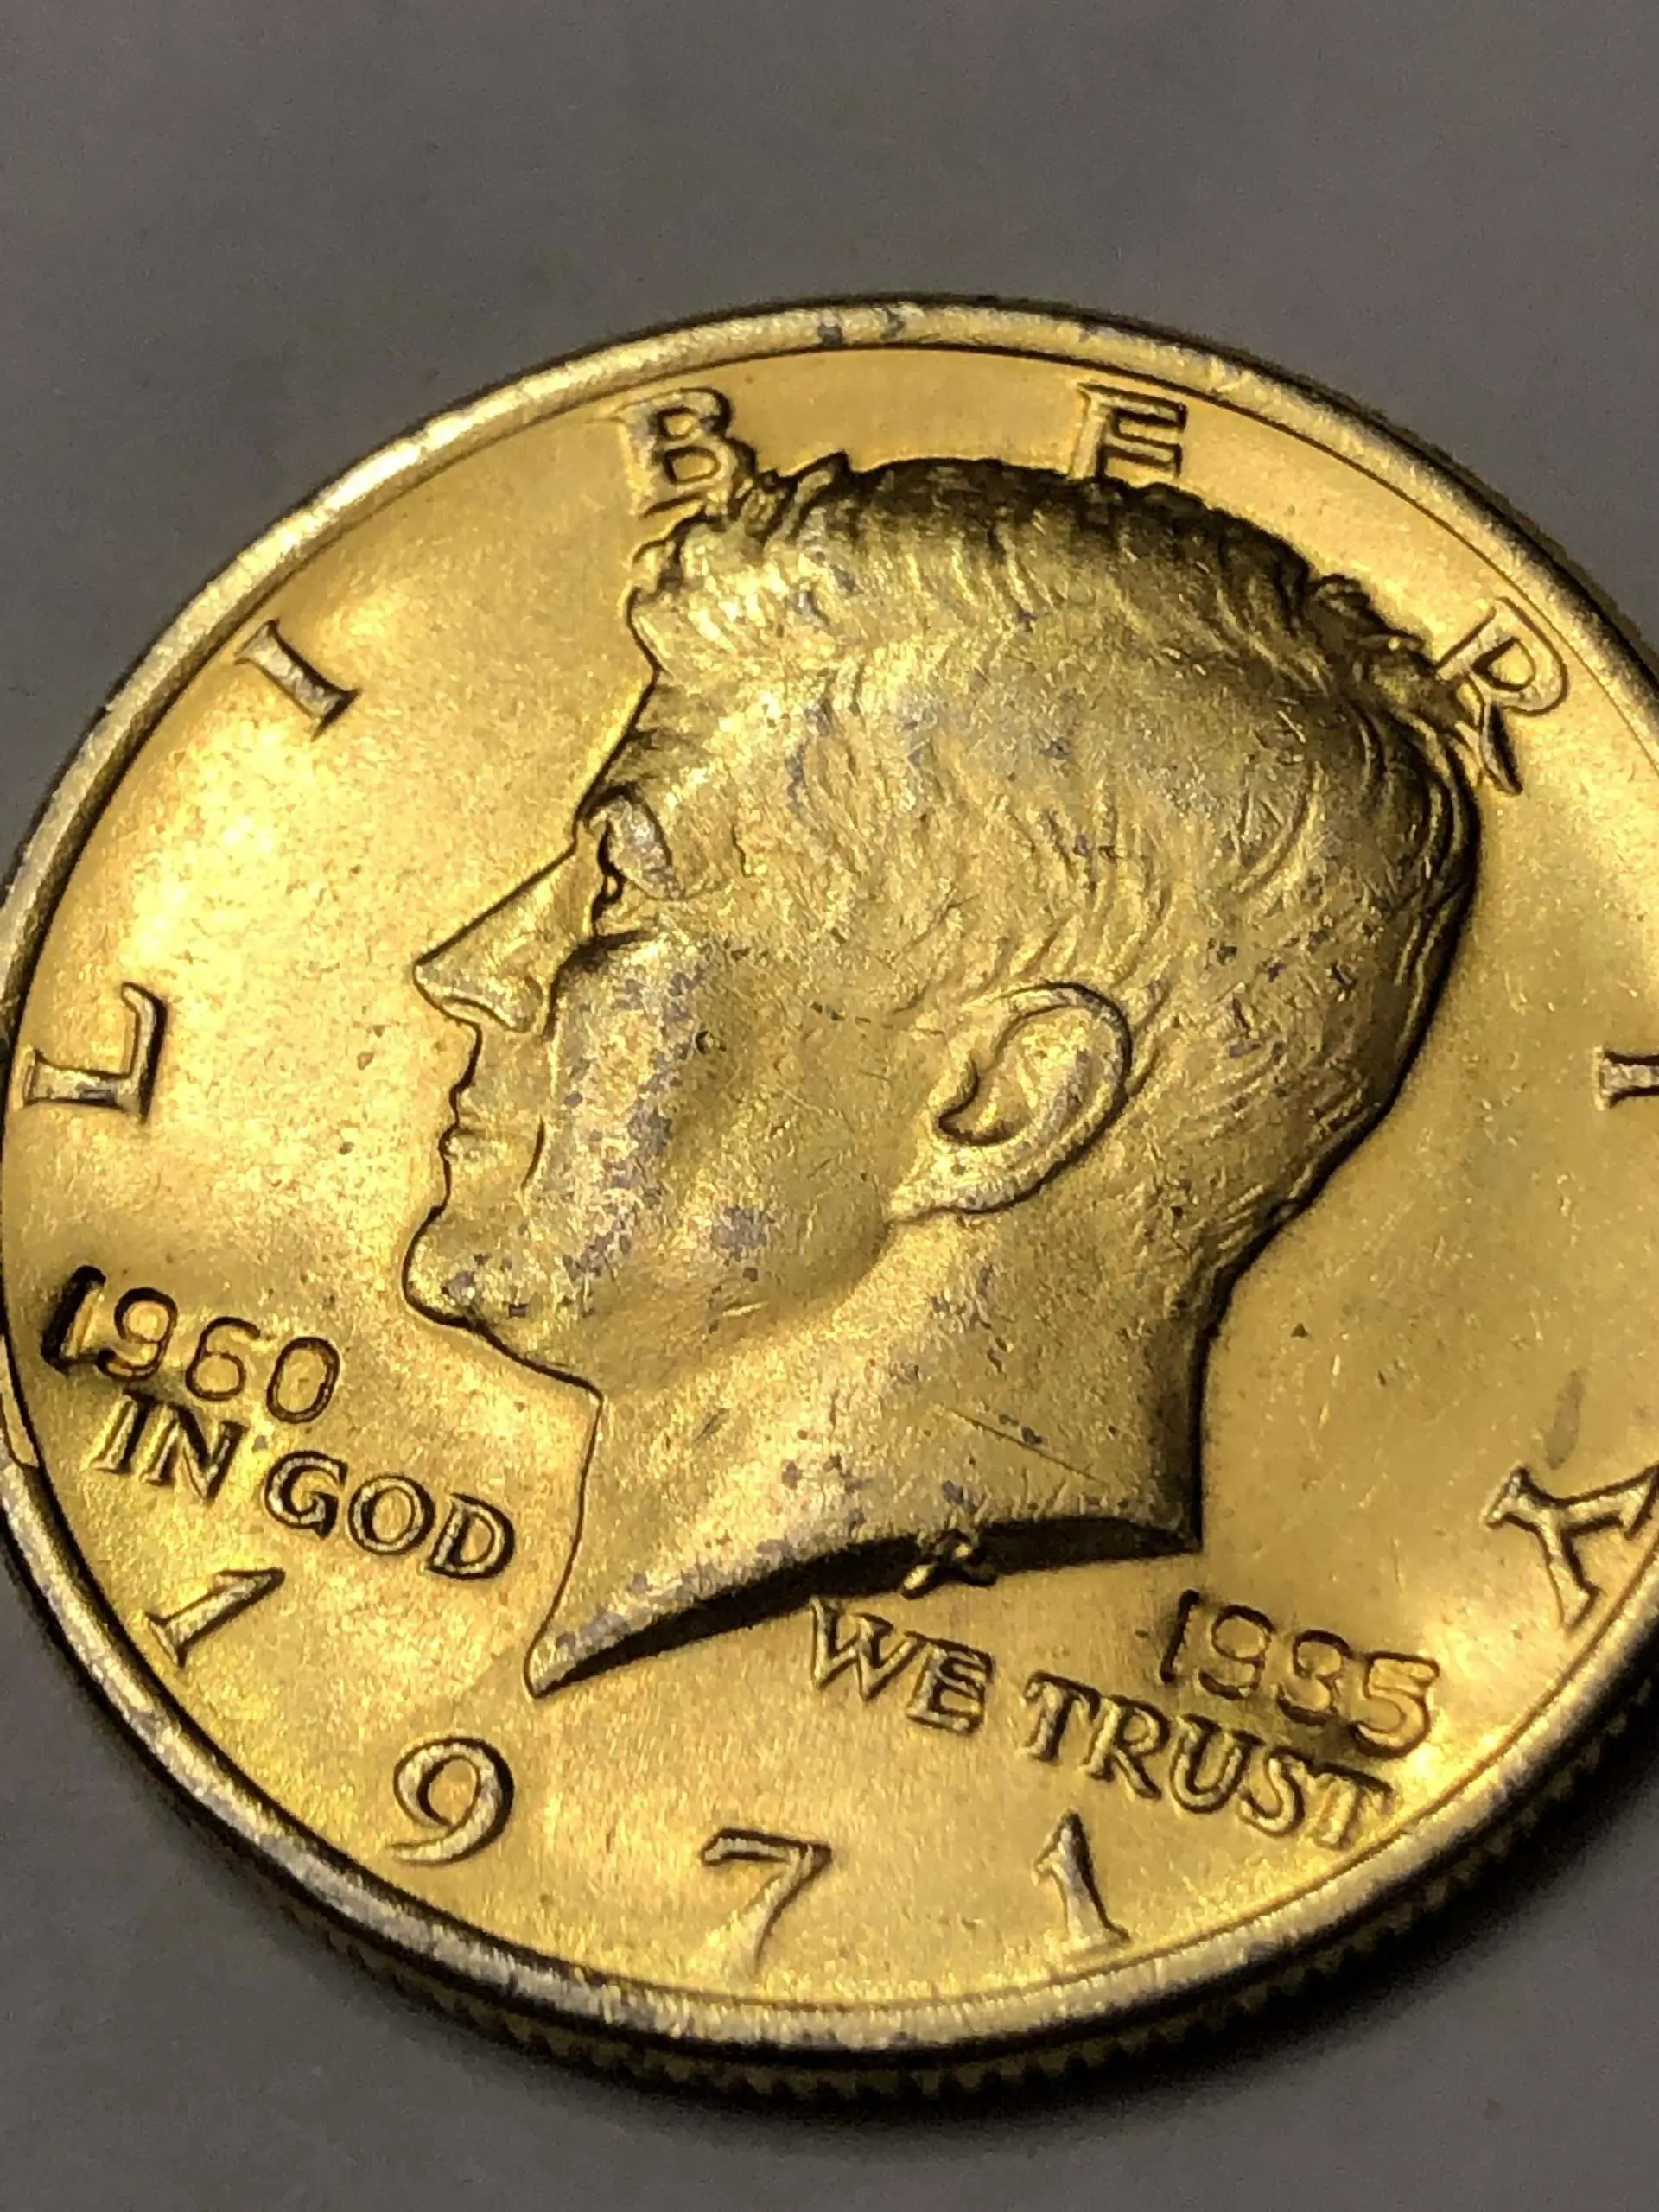 Possibly gold plated Kennedy half dollar? : coins